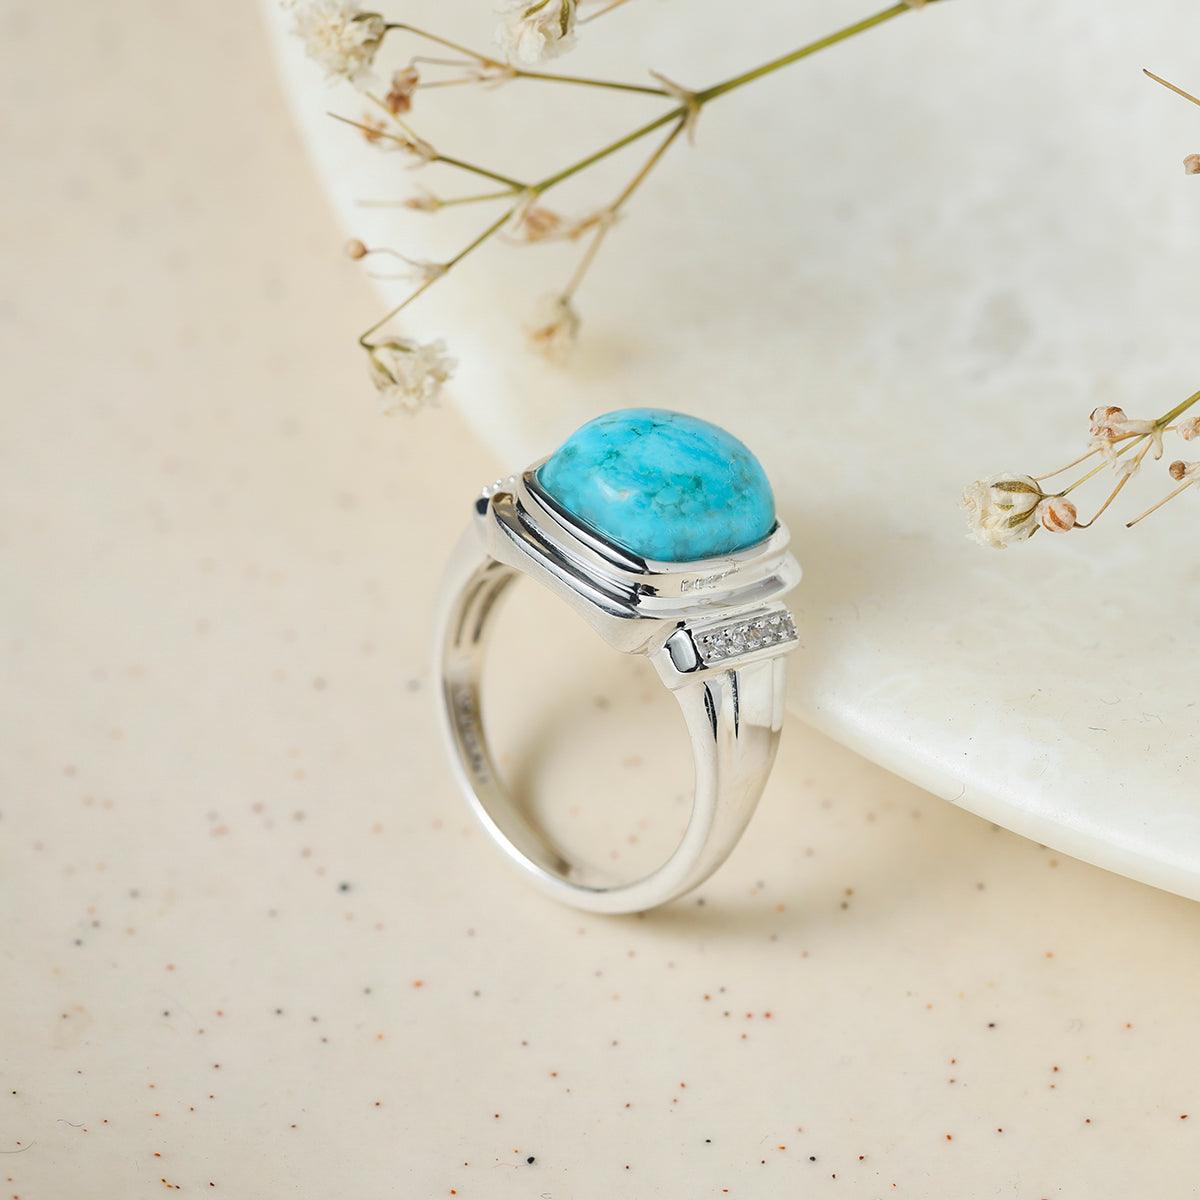 Turquoise & White Zircon Ring in 925 Sterling Silver - YoTreasure